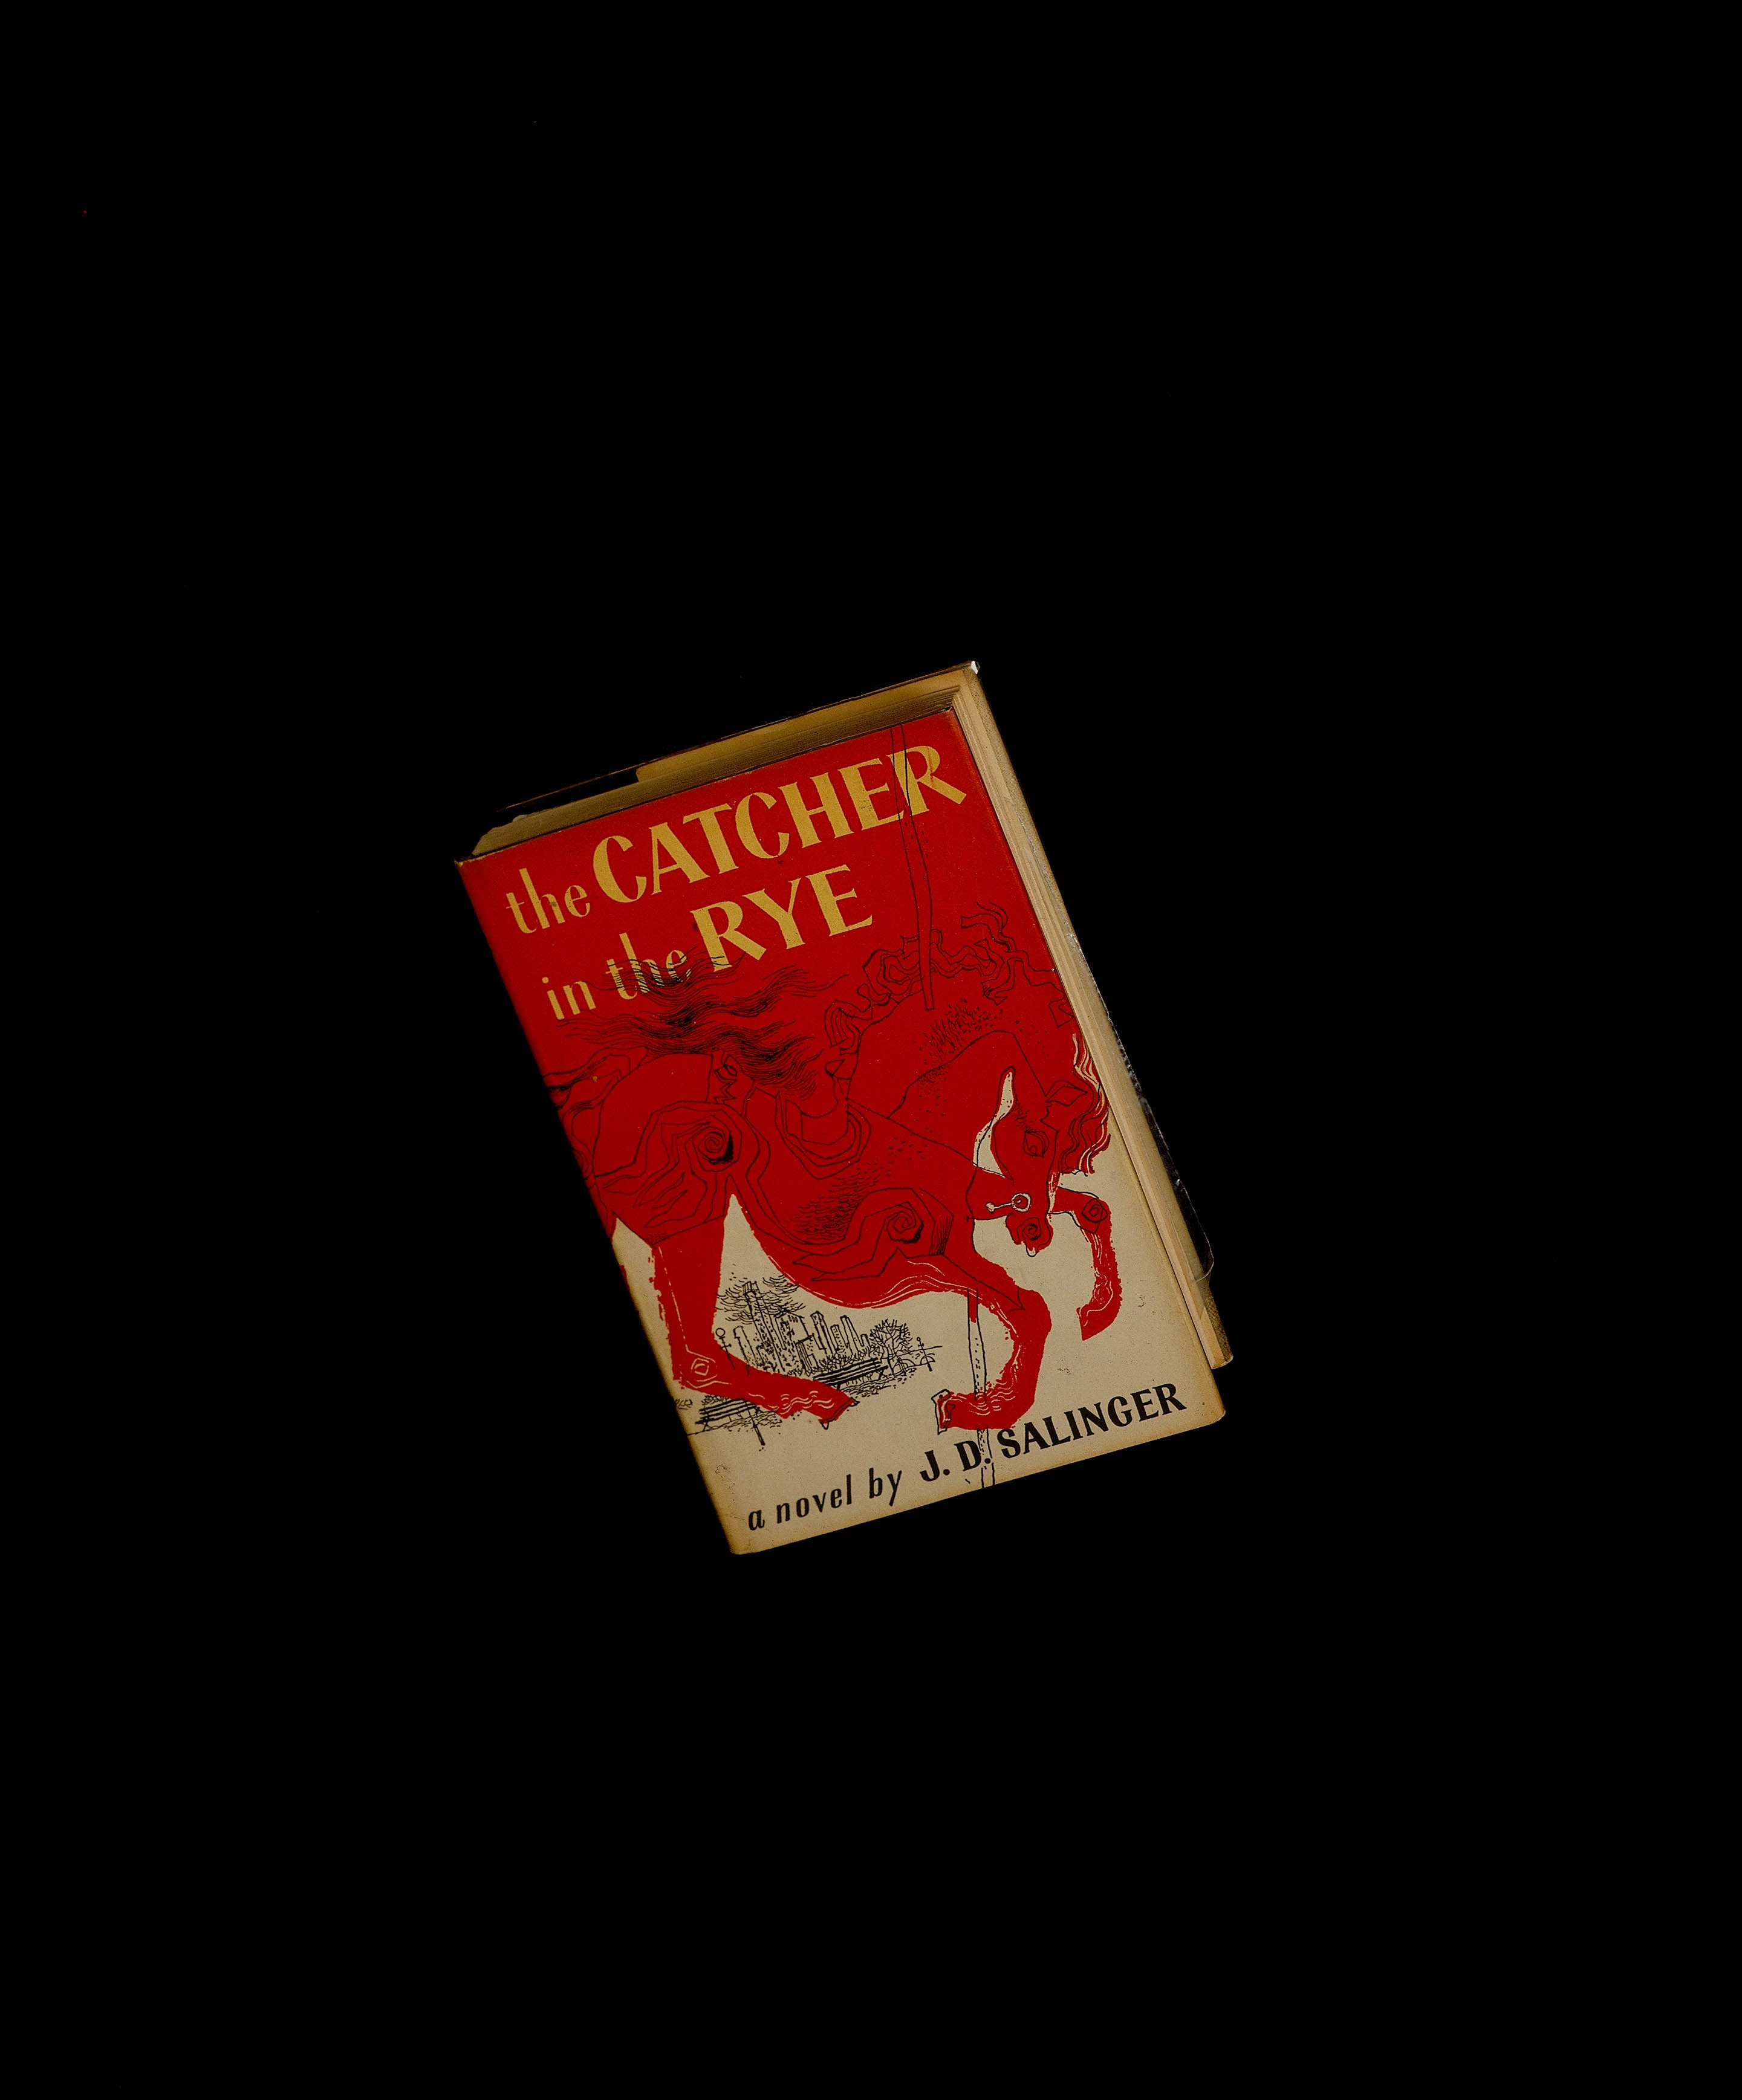  Hardcover 1st edition of author J.D. Salinger's "Catcher in the Rye" circa 1981. | Source: Getty Images